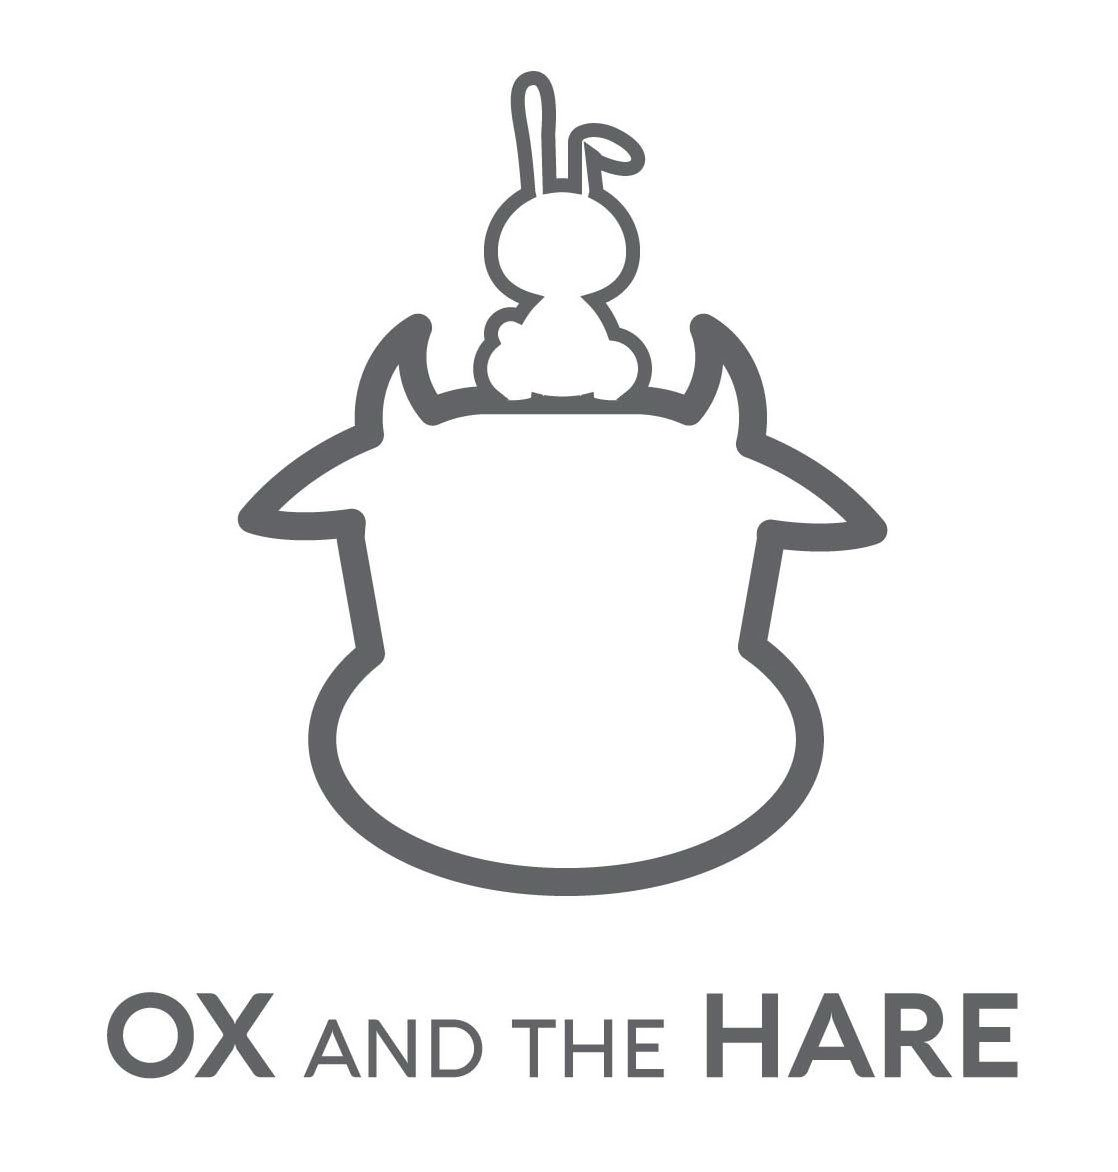  OX AND THE HARE